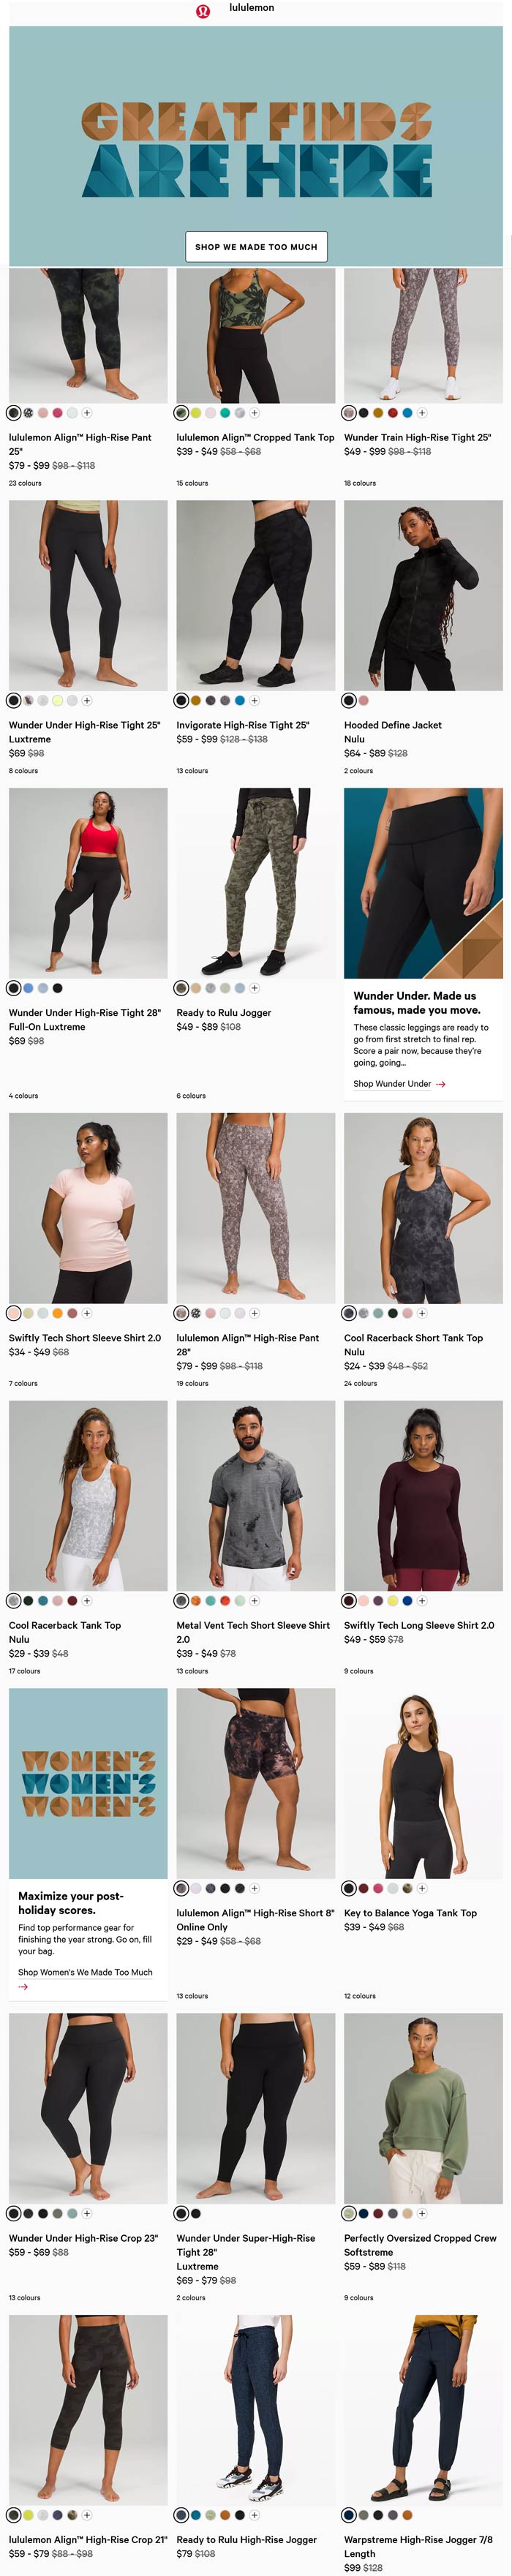 lululemon stores Coupon  Overstock athletic clearance going on at lululemon #lululemon 